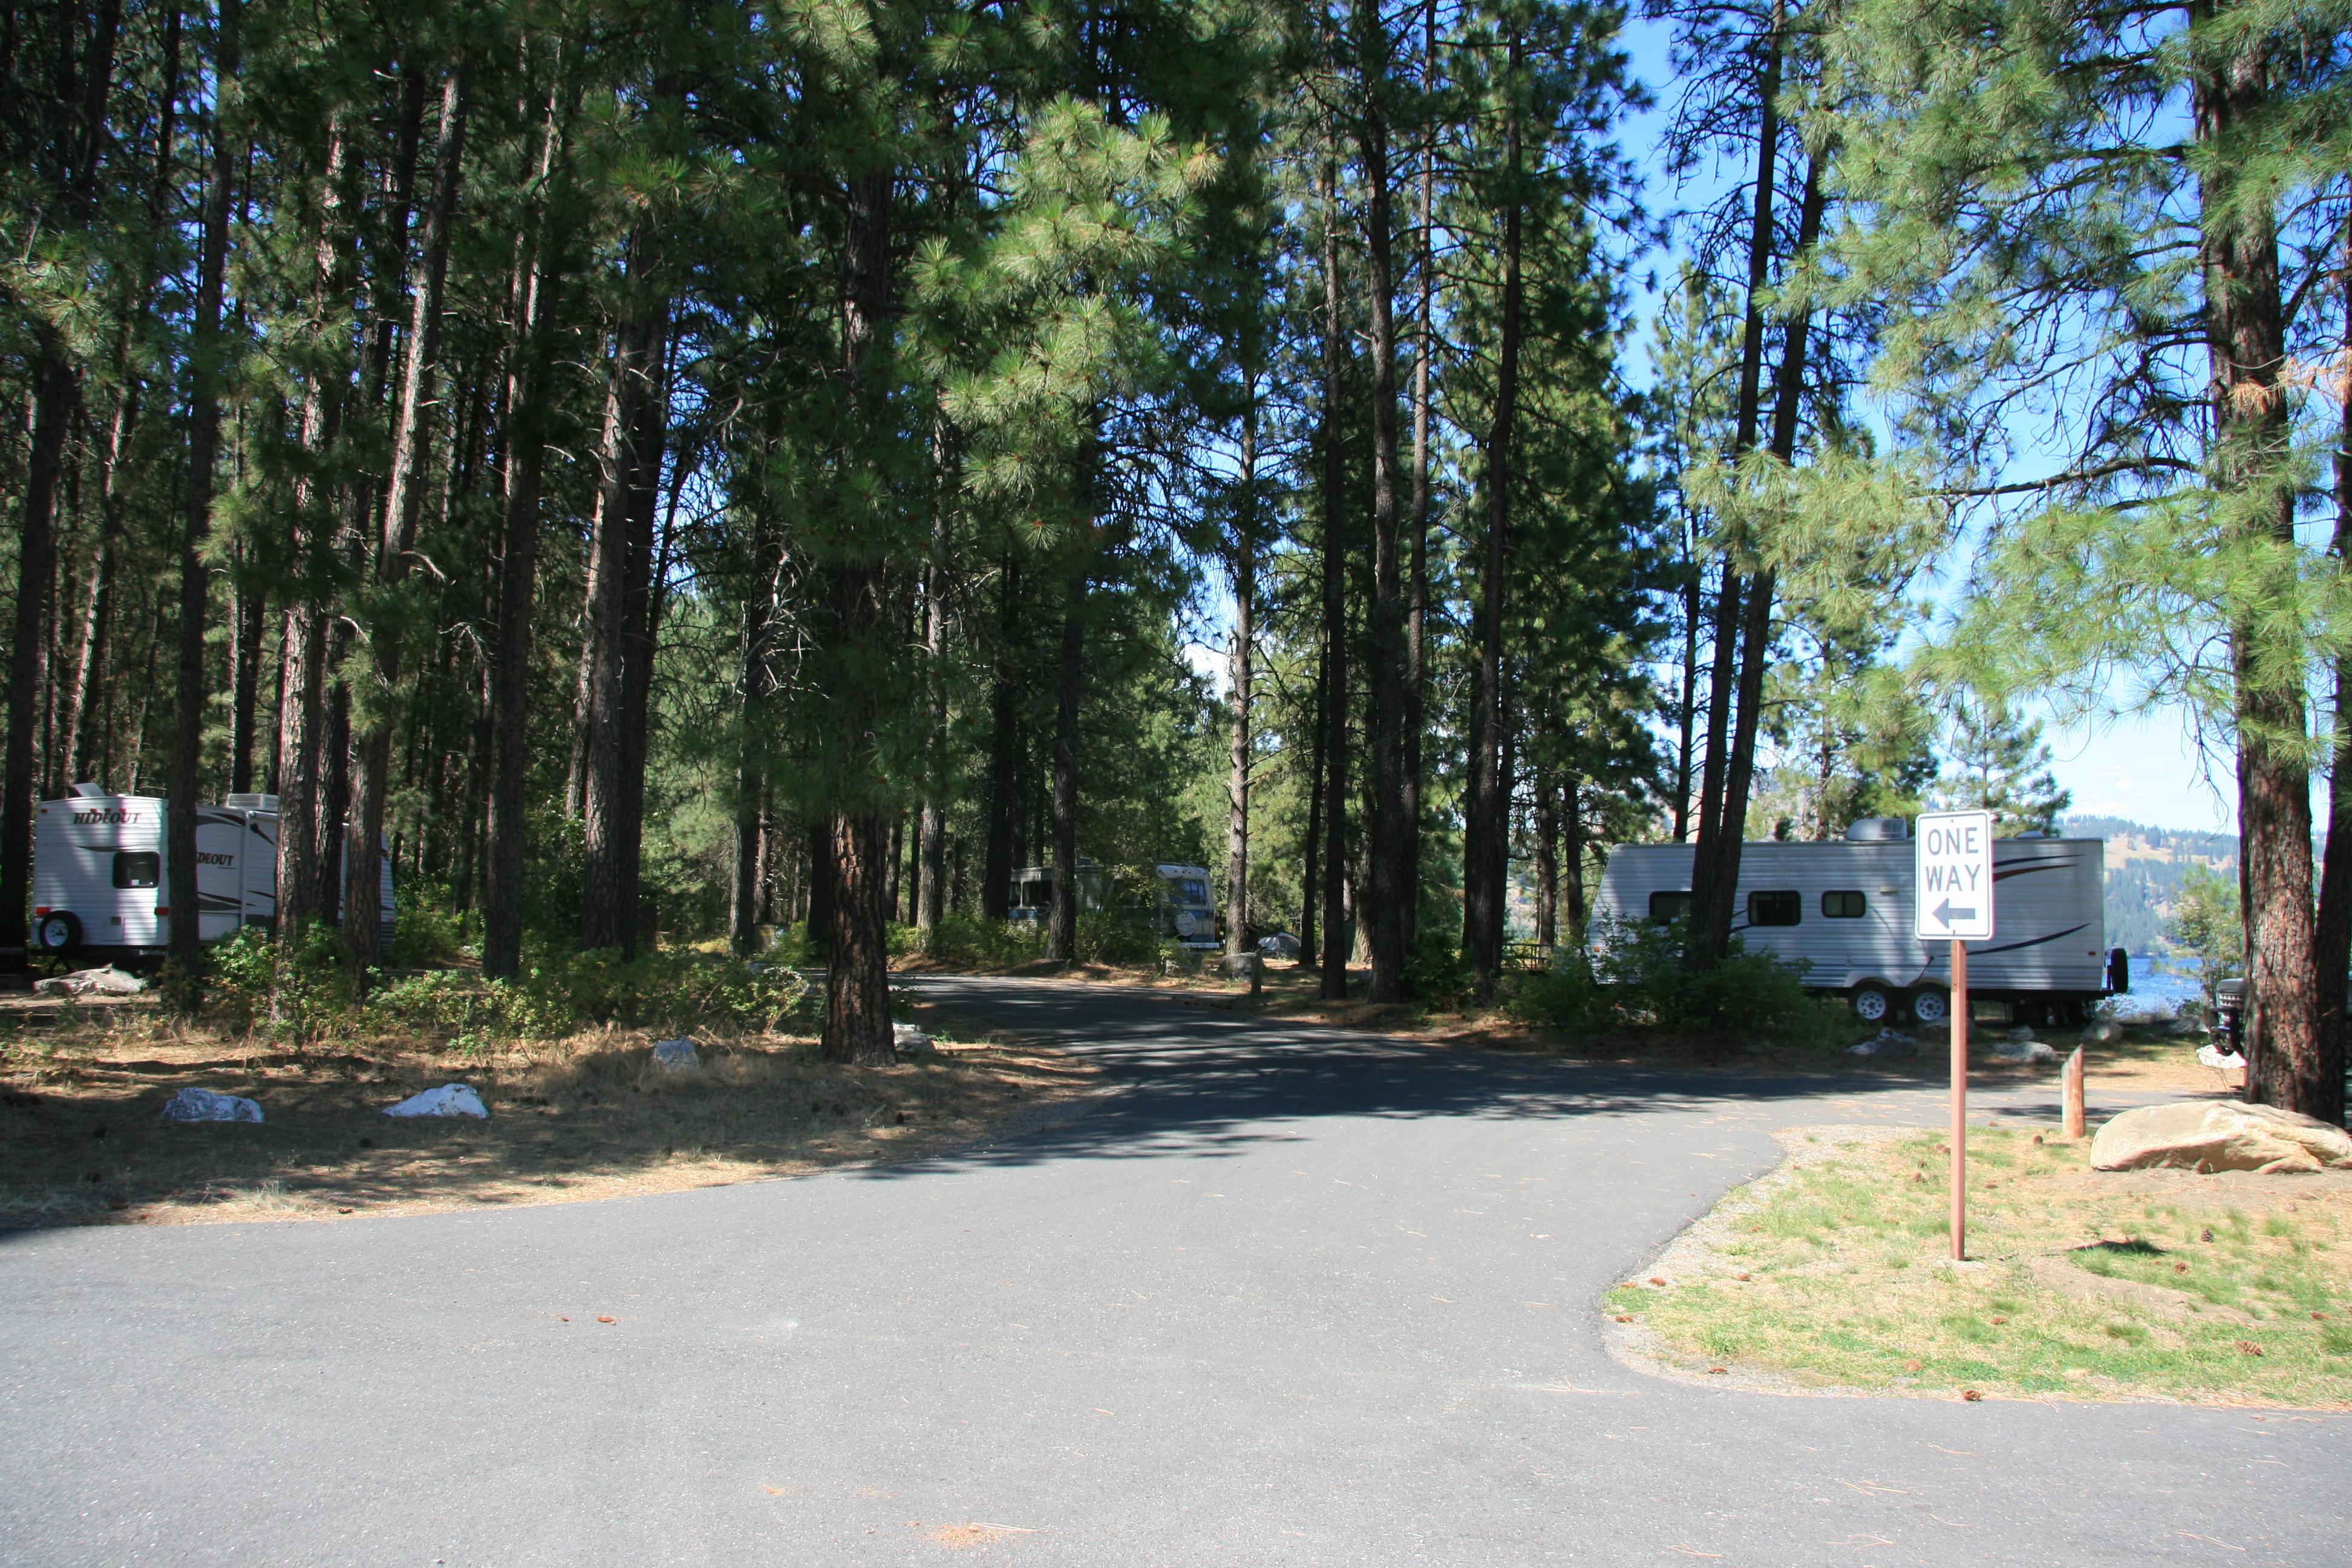 Several paved camping spaces at Snag Cove in the pine trees.